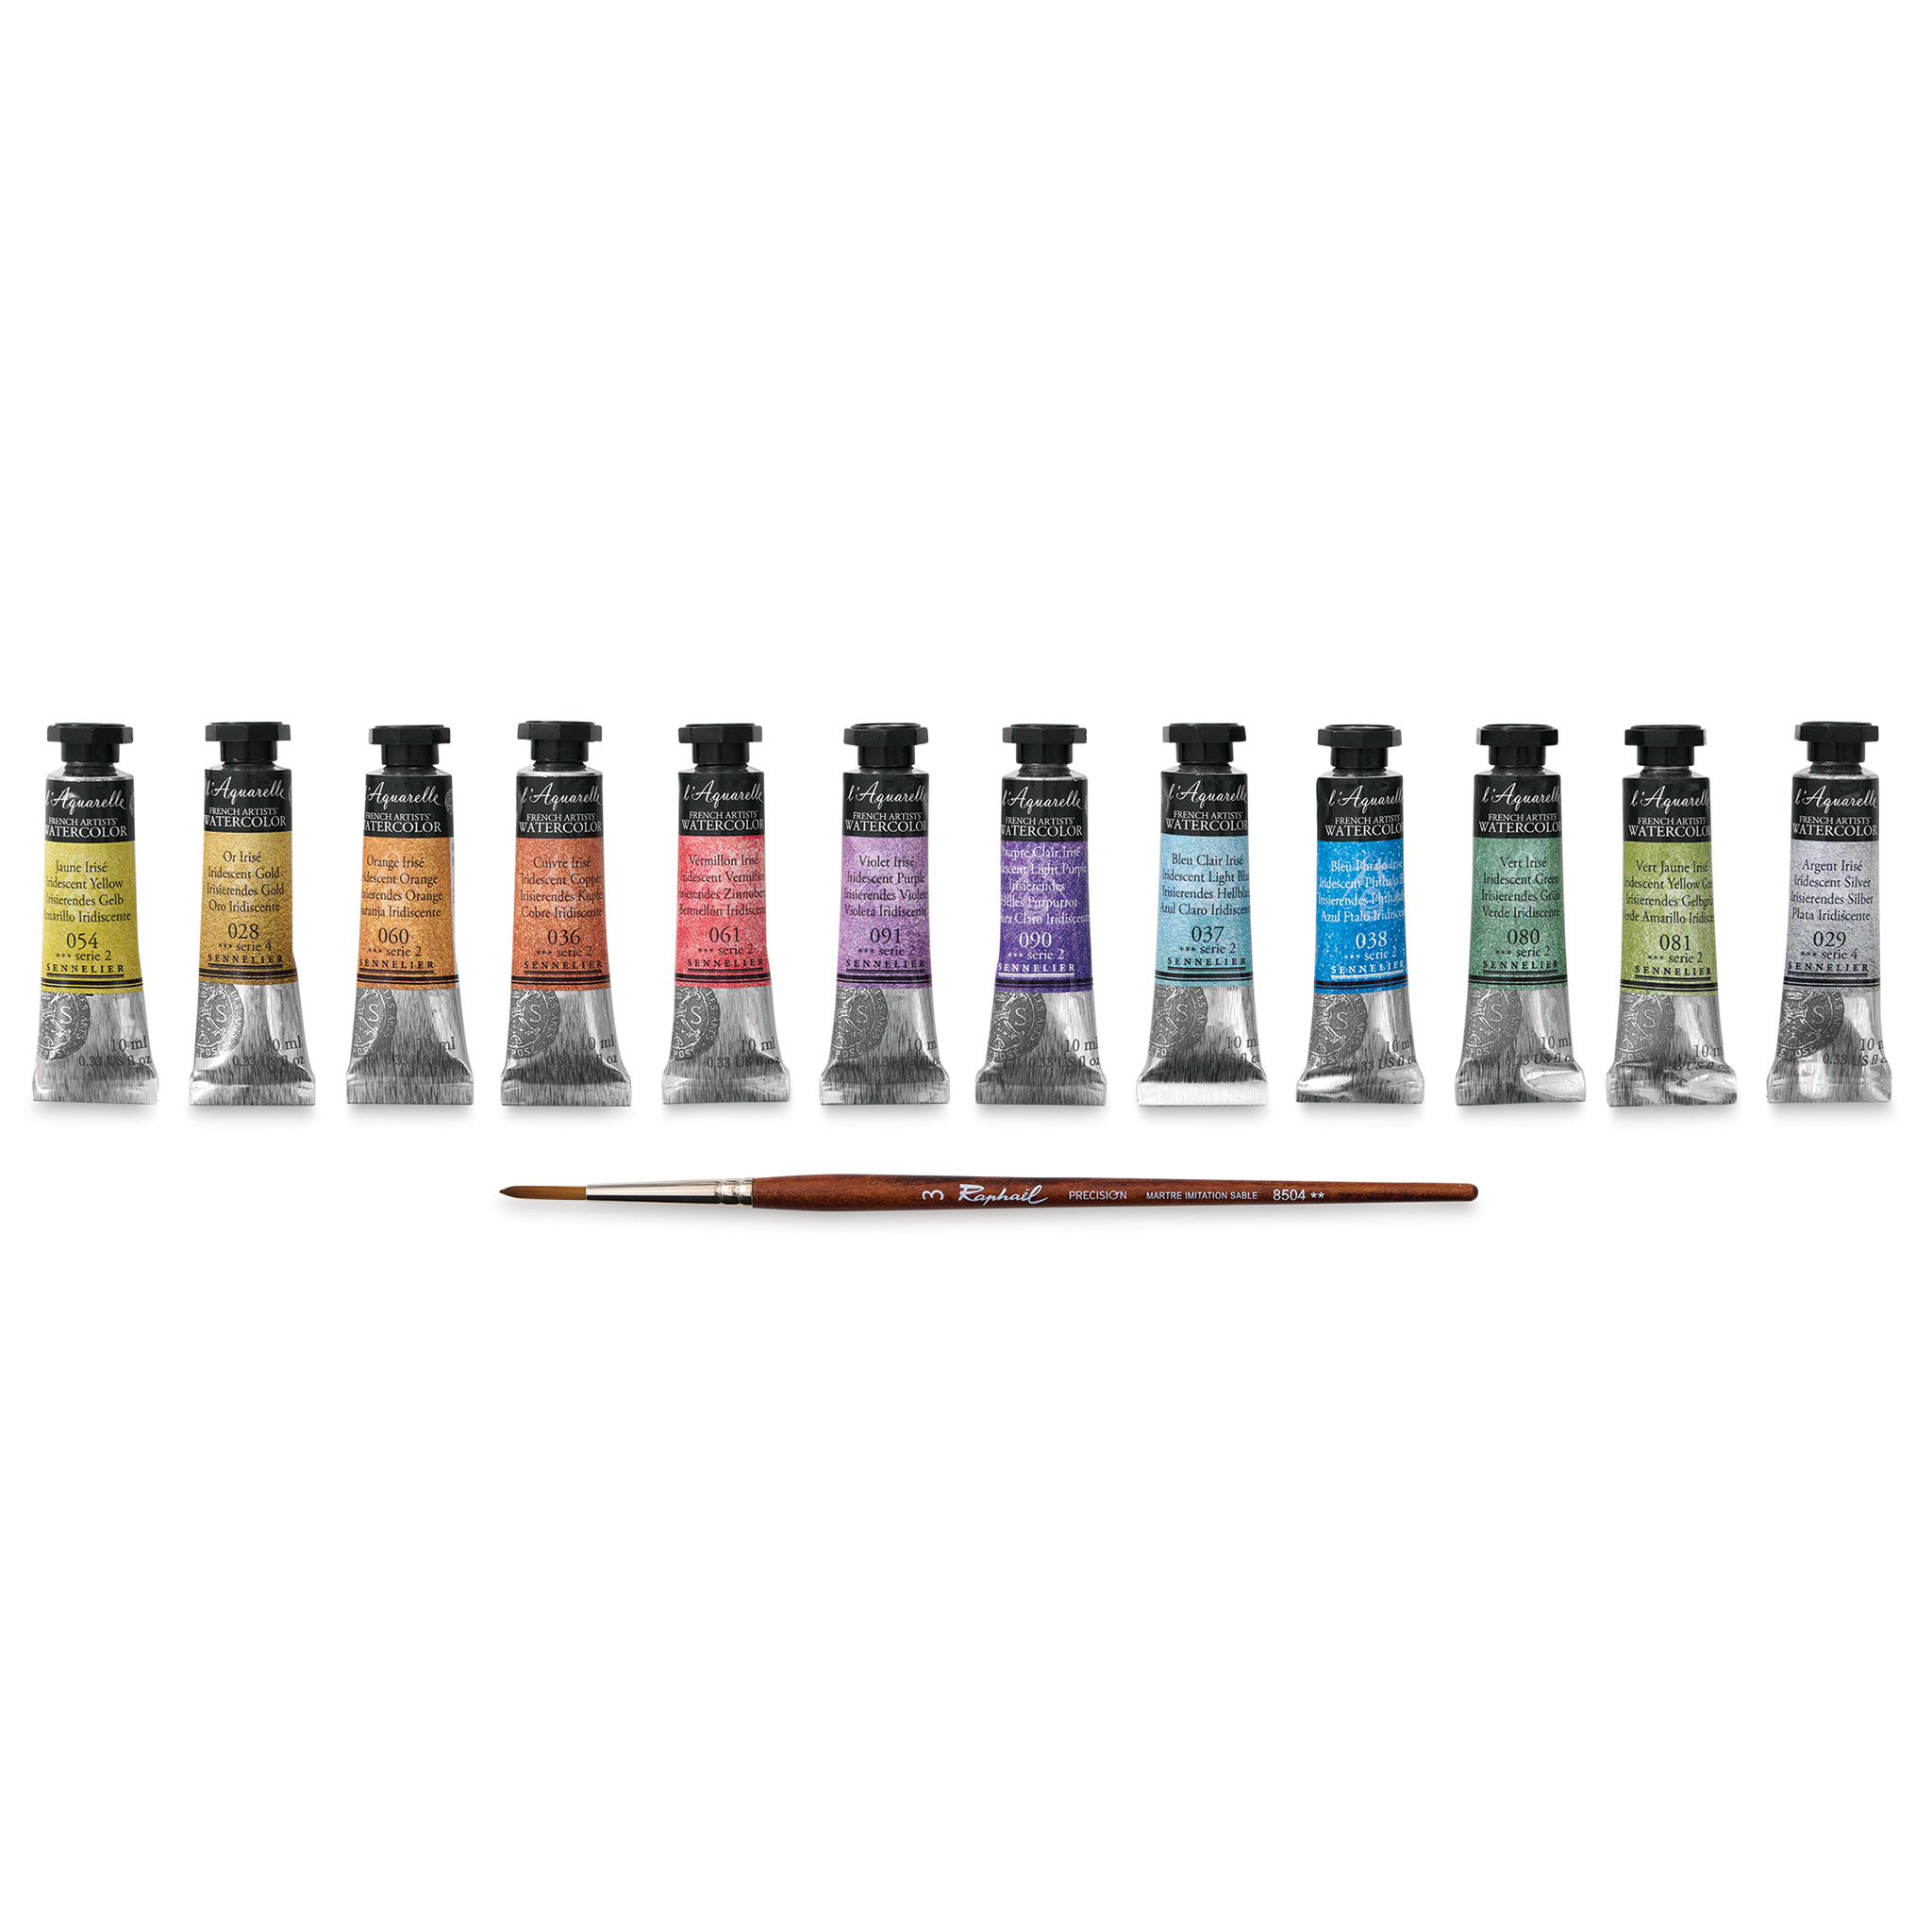 Sennelier French Artists' Watercolor Set - Iridescent, Metal Case, Set of  12 colors, 10 ml tubes 